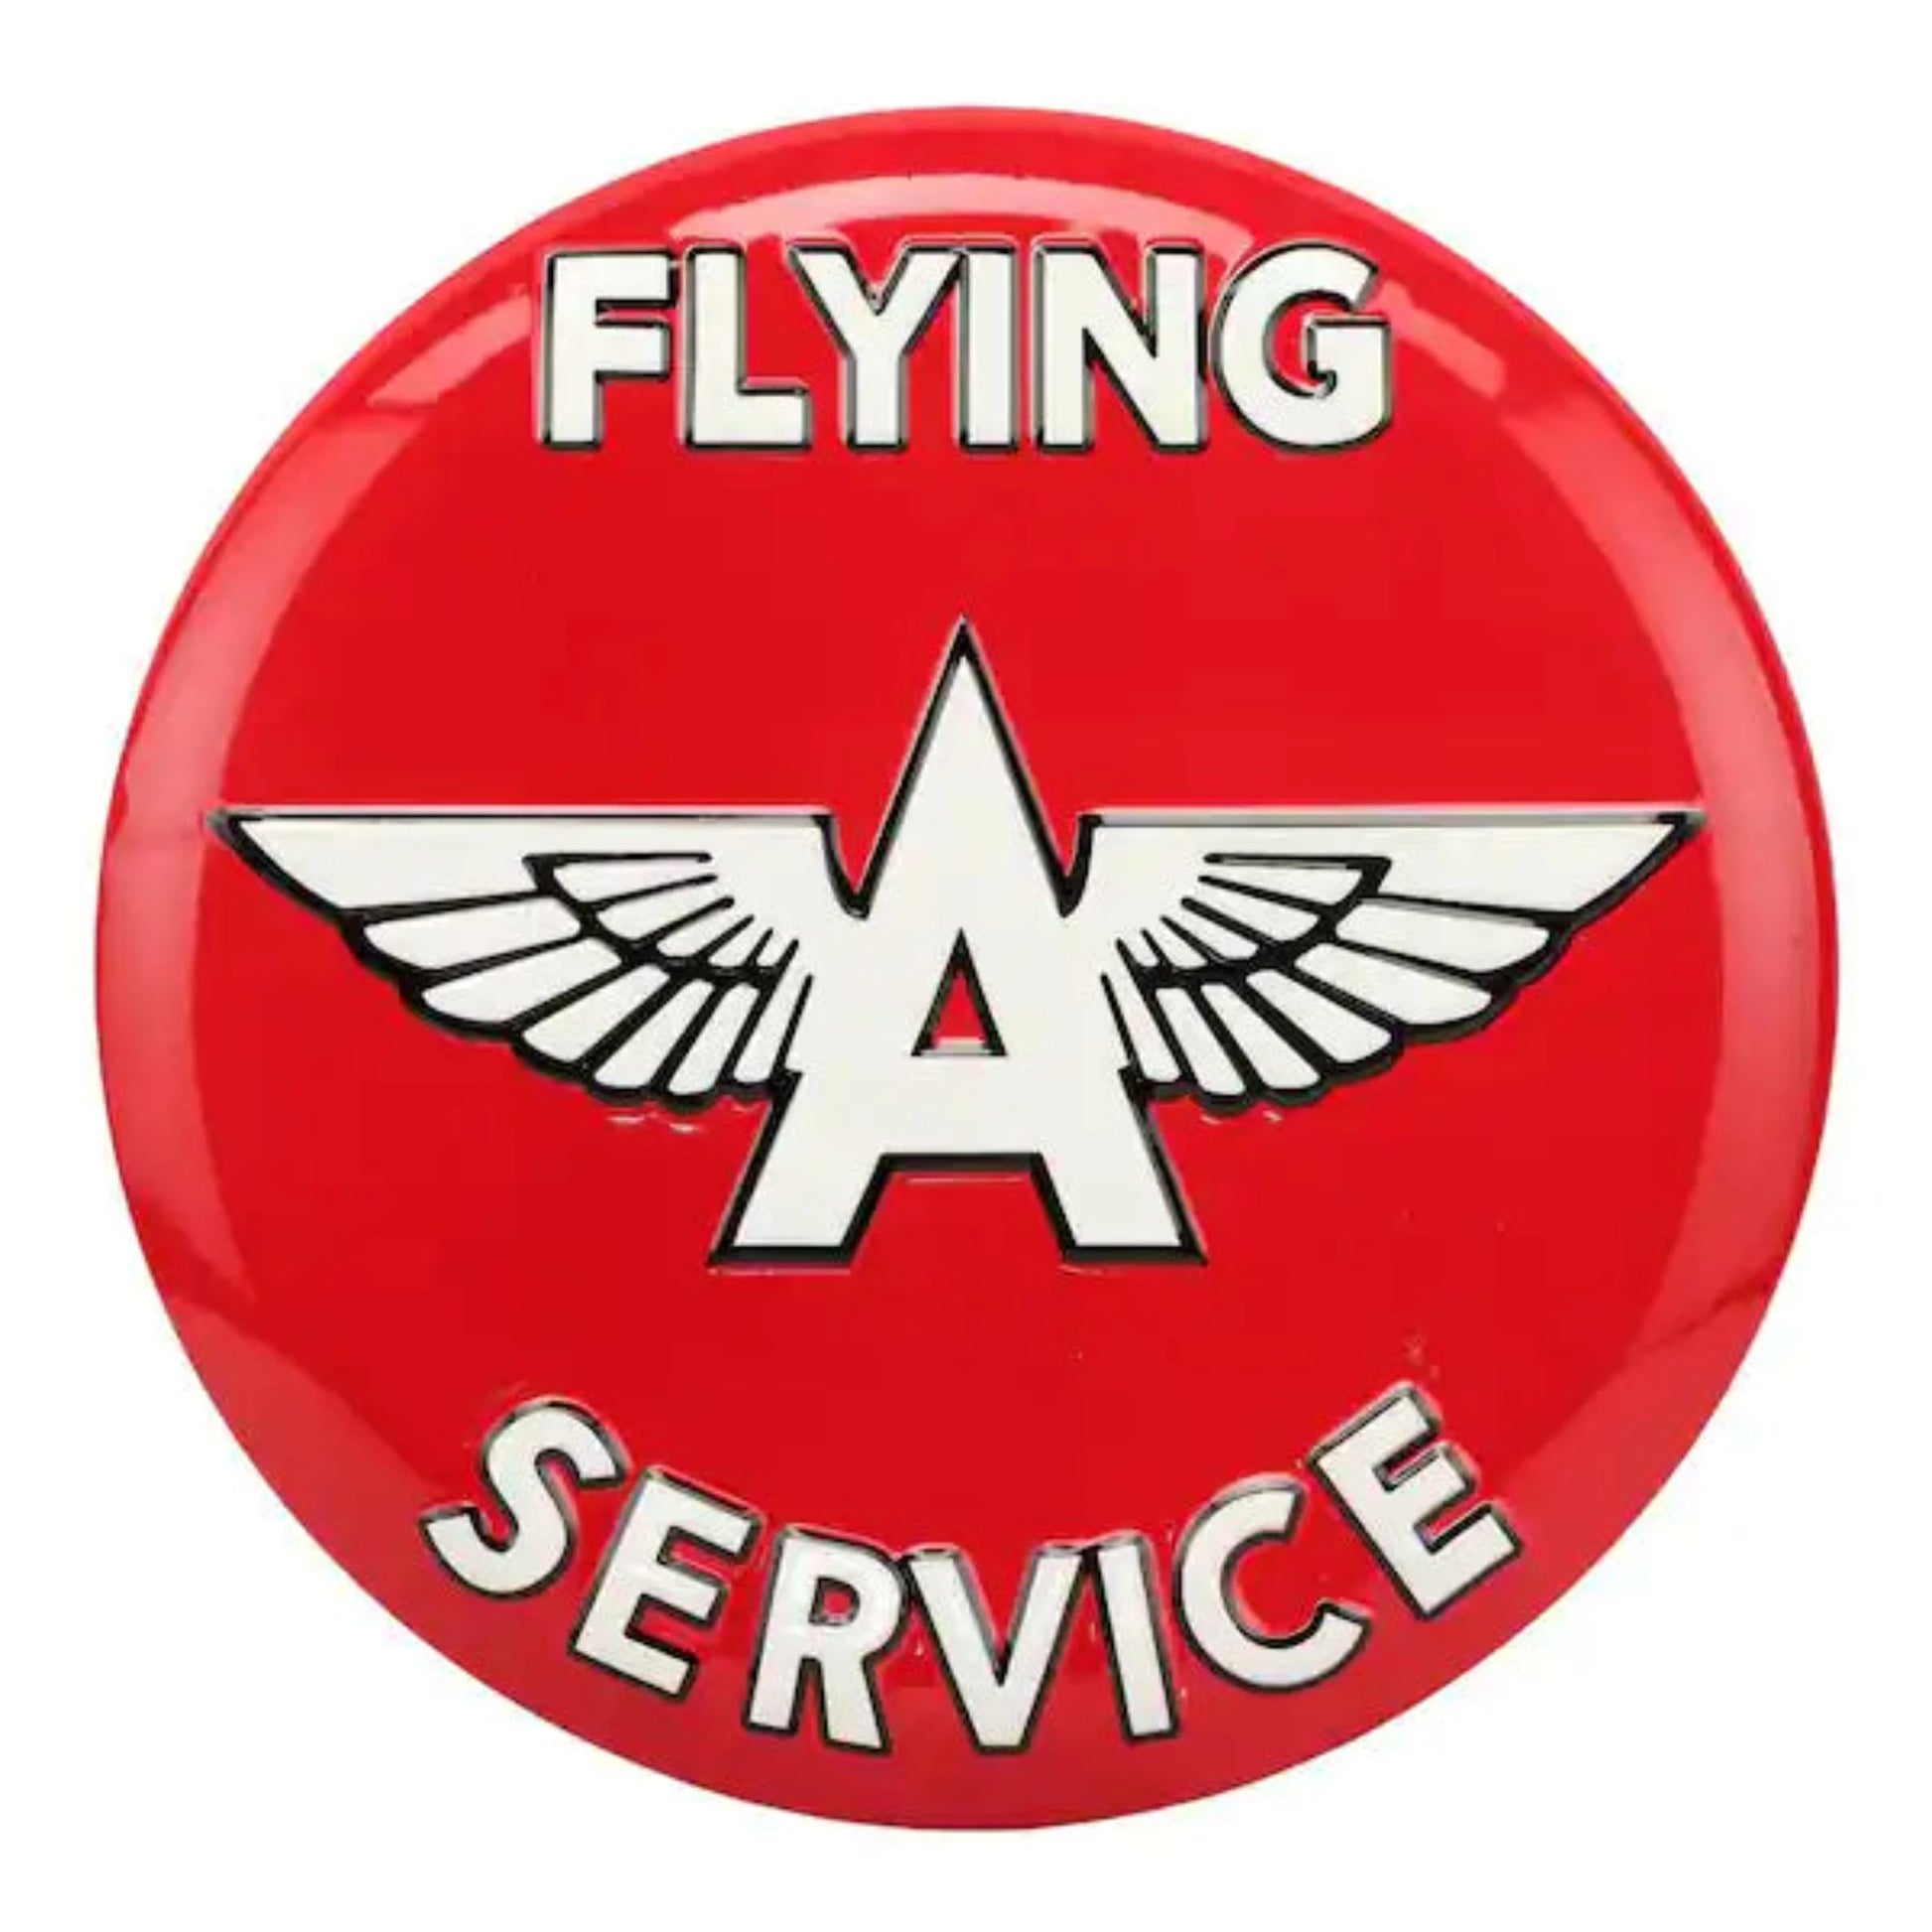 Bright red circular tin sign featuring a winged "A" emblem with the words "Flying A Service".